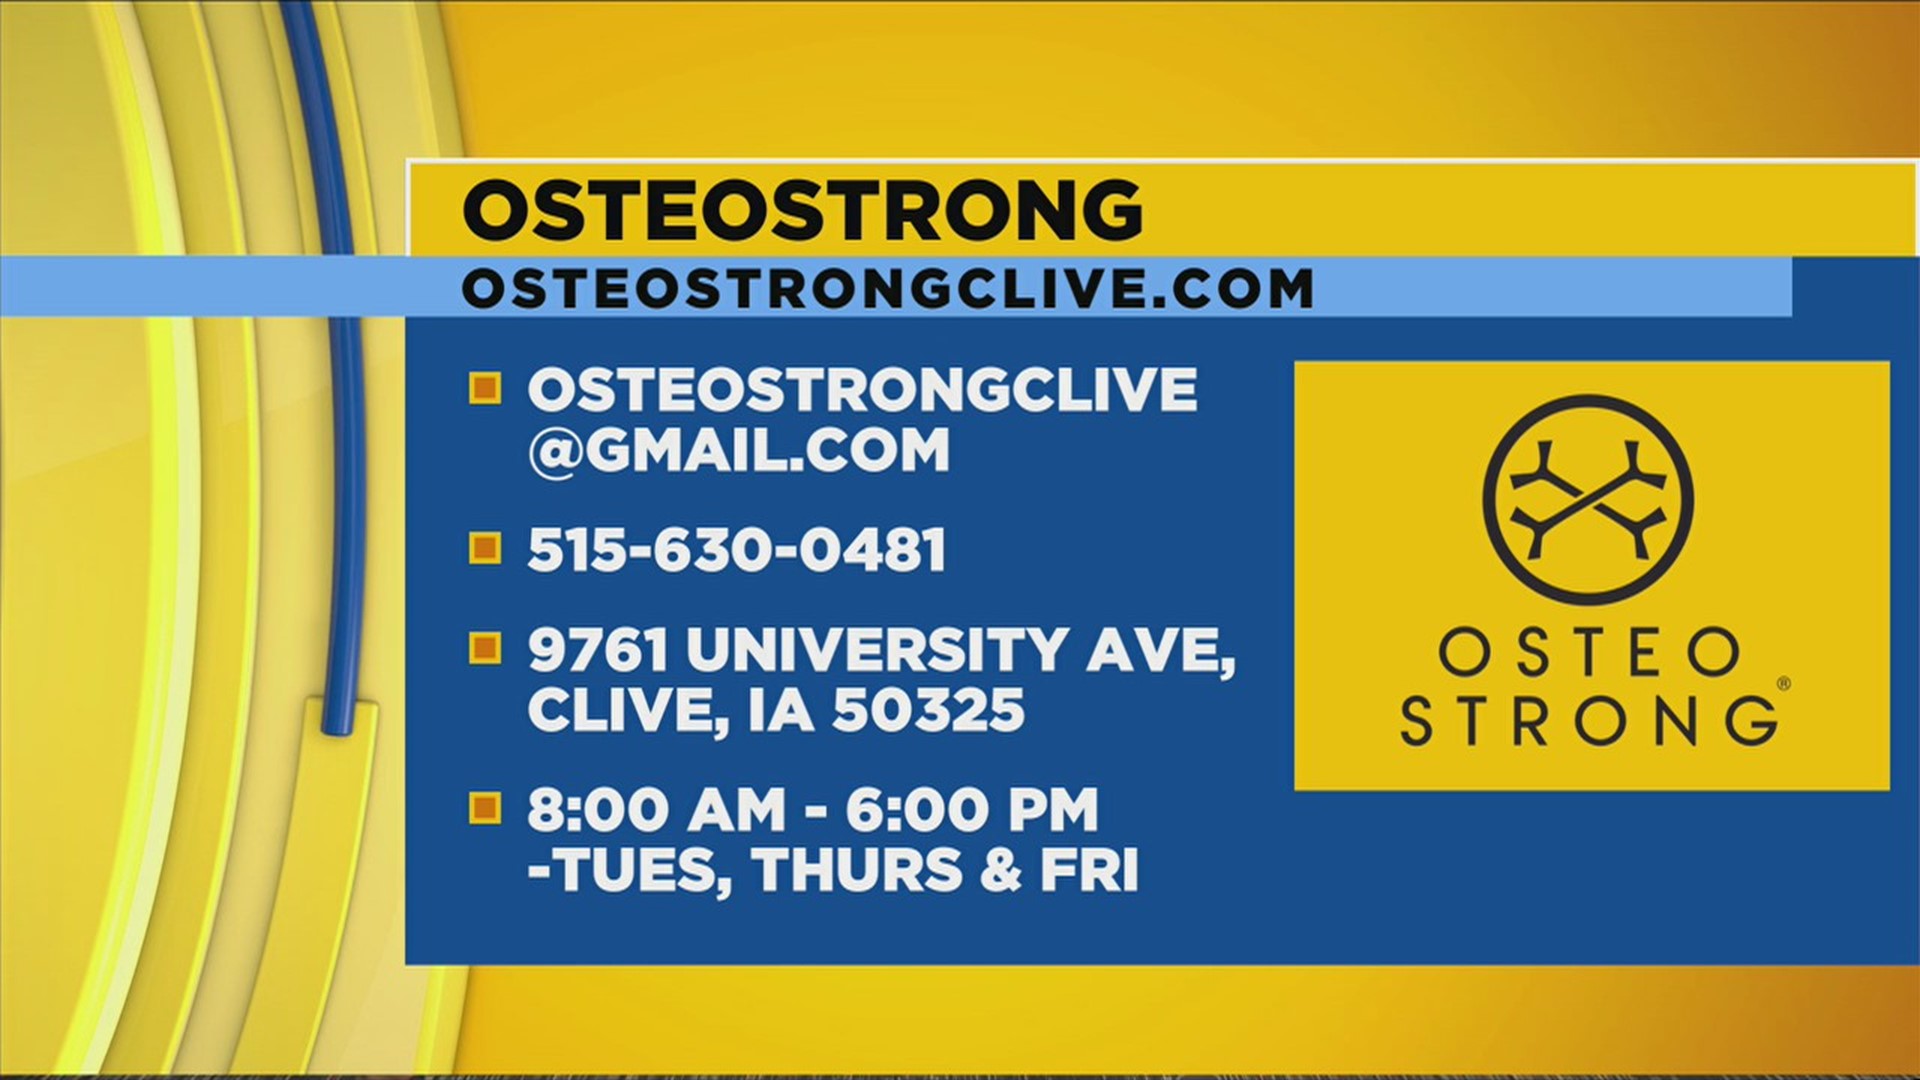 Osteostrong - Improving Your Health